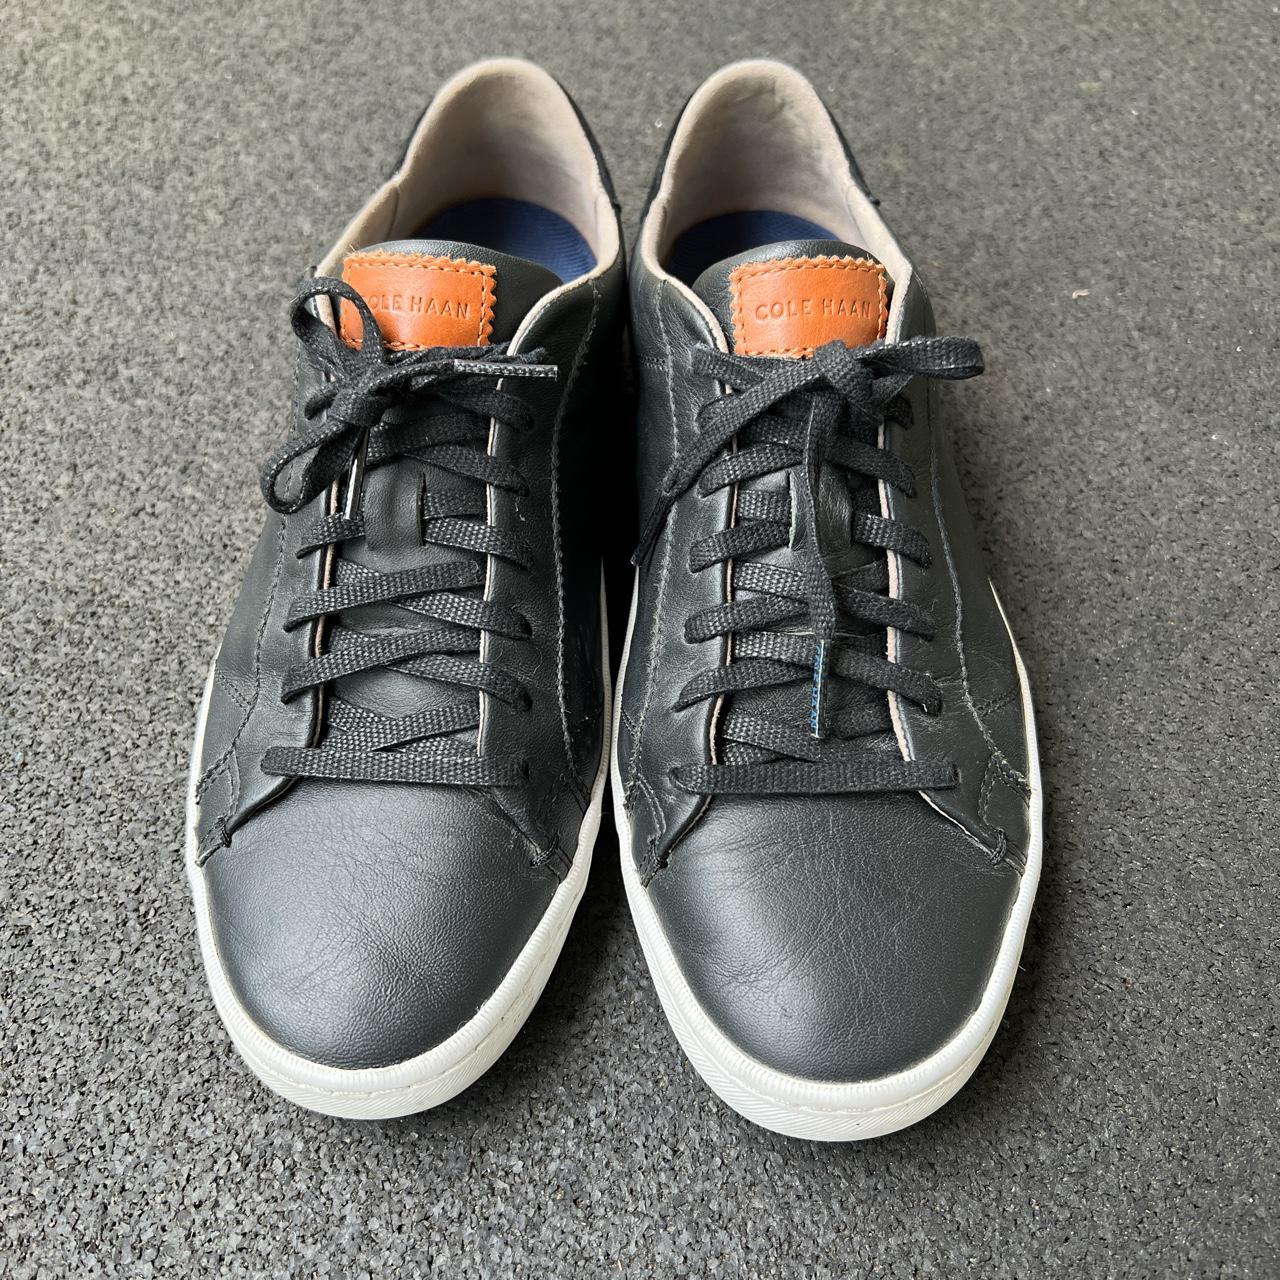 Product Image 1 - Cole Haan lace up sneakers

▫️Size